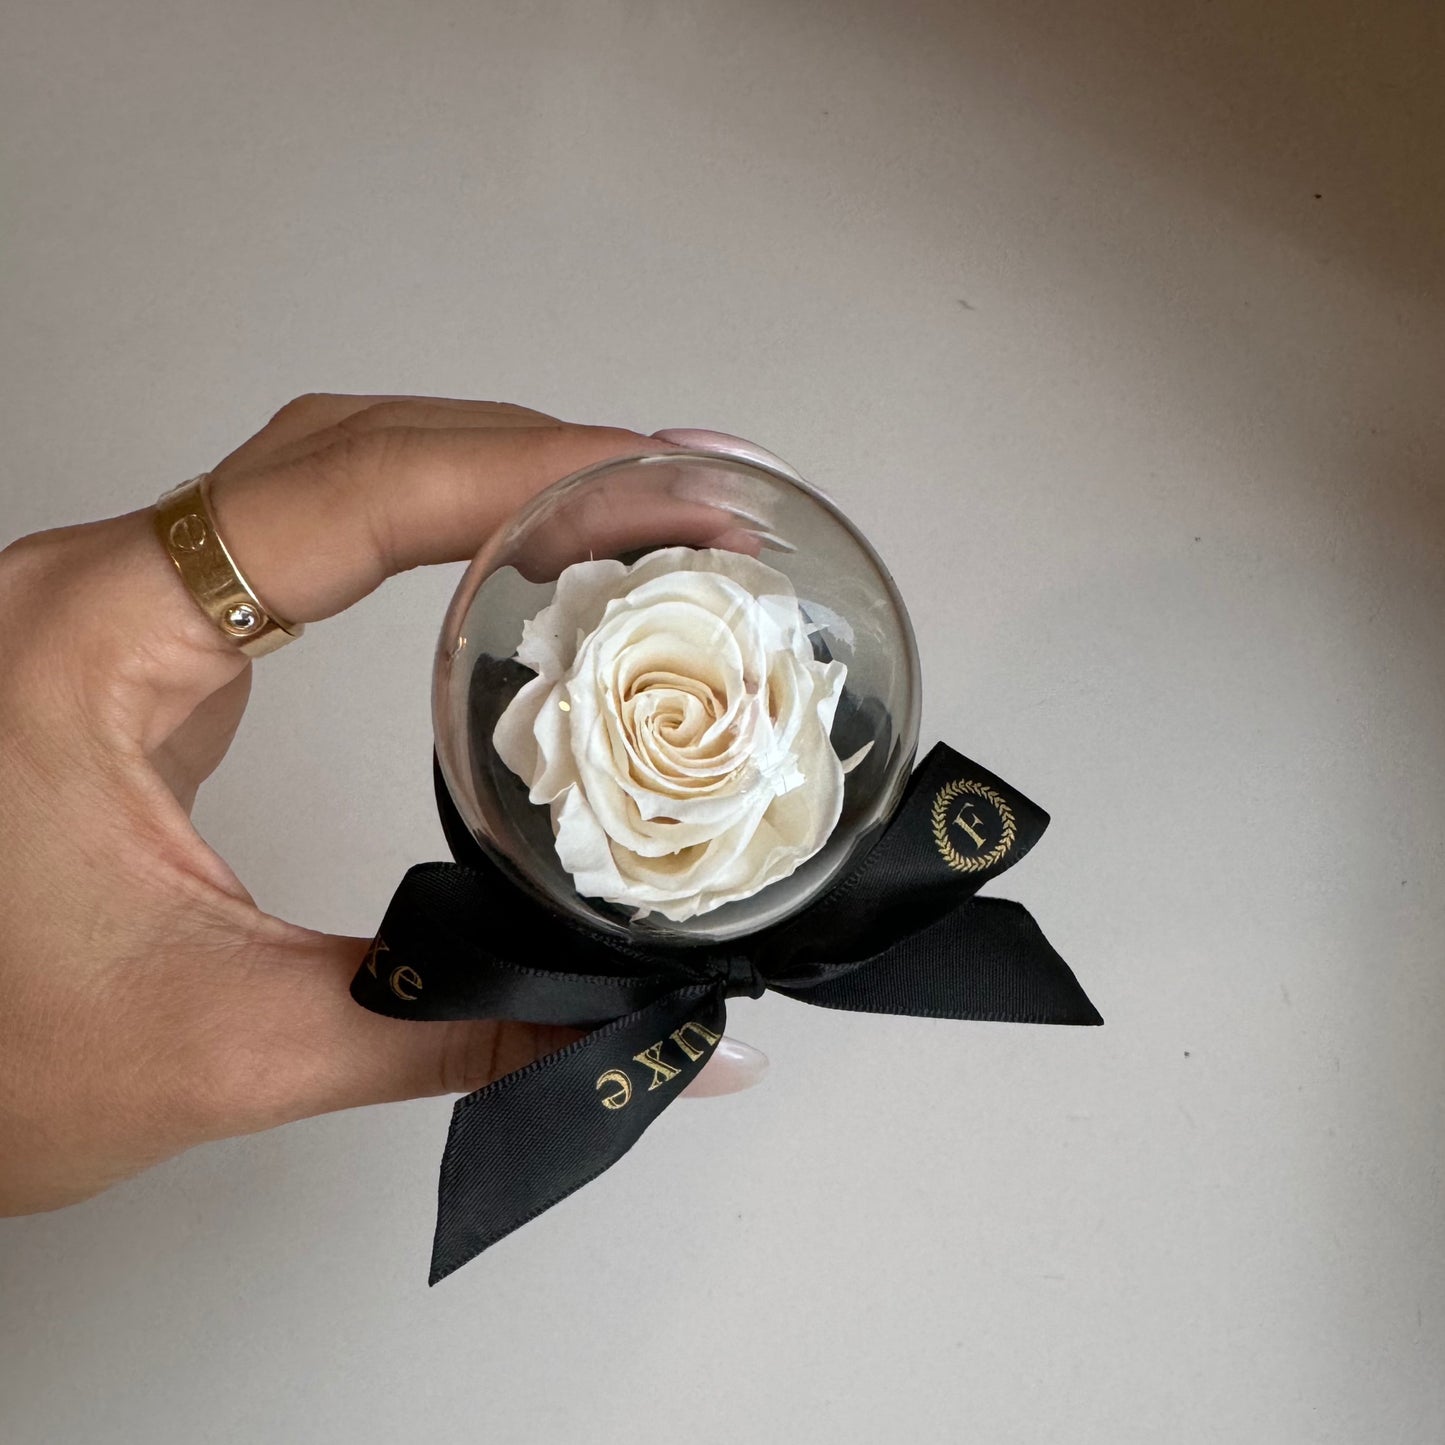 Beauty and the beast glass dome rose mini everlasting white rose 